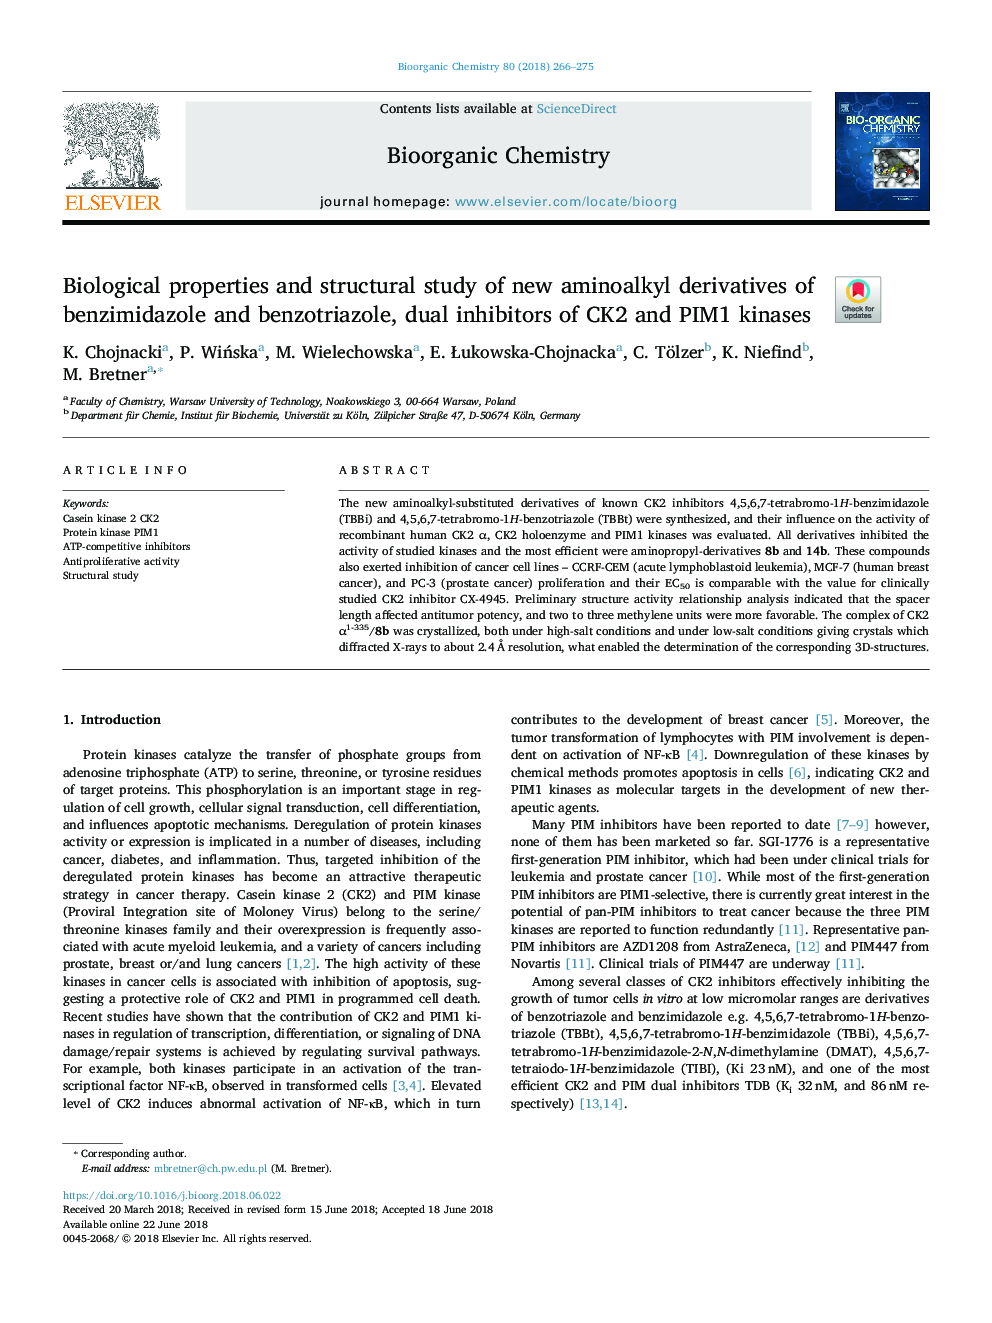 Biological properties and structural study of new aminoalkyl derivatives of benzimidazole and benzotriazole, dual inhibitors of CK2 and PIM1 kinases